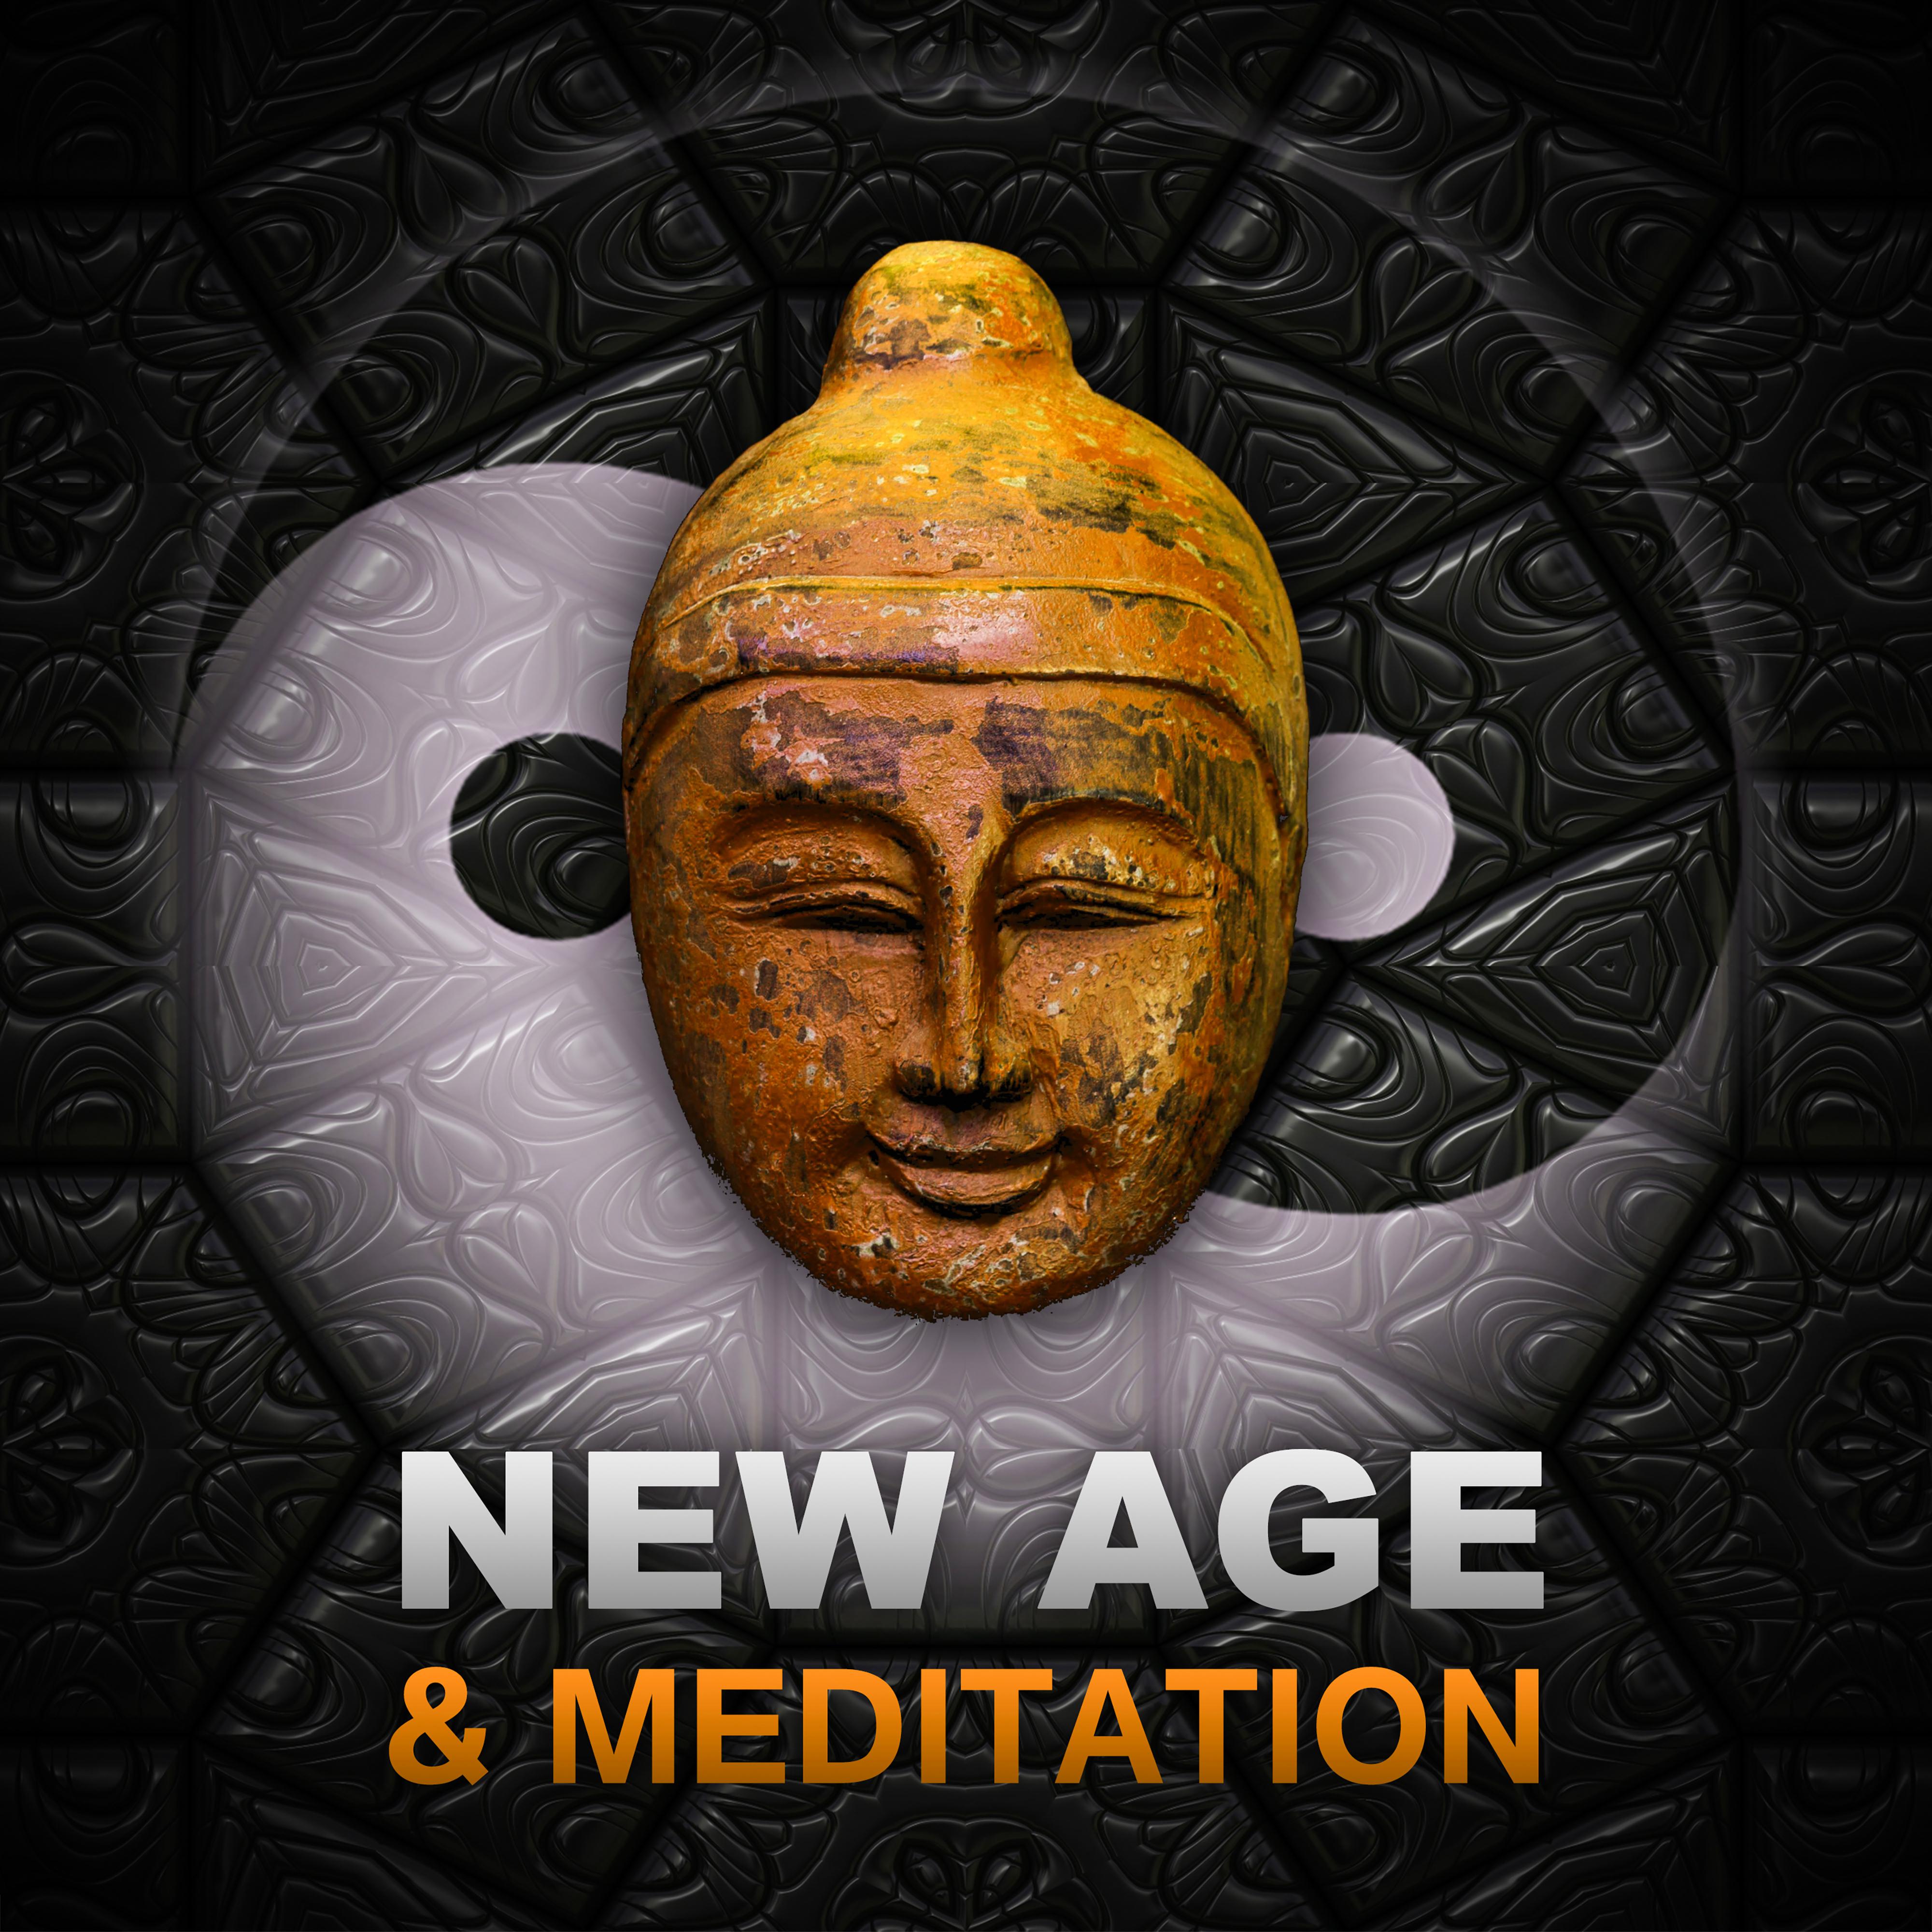 New Age & Meditation – Calming Sounds of Nature for Meditation, Relaxation, Yoga, Pilates, Contemplation